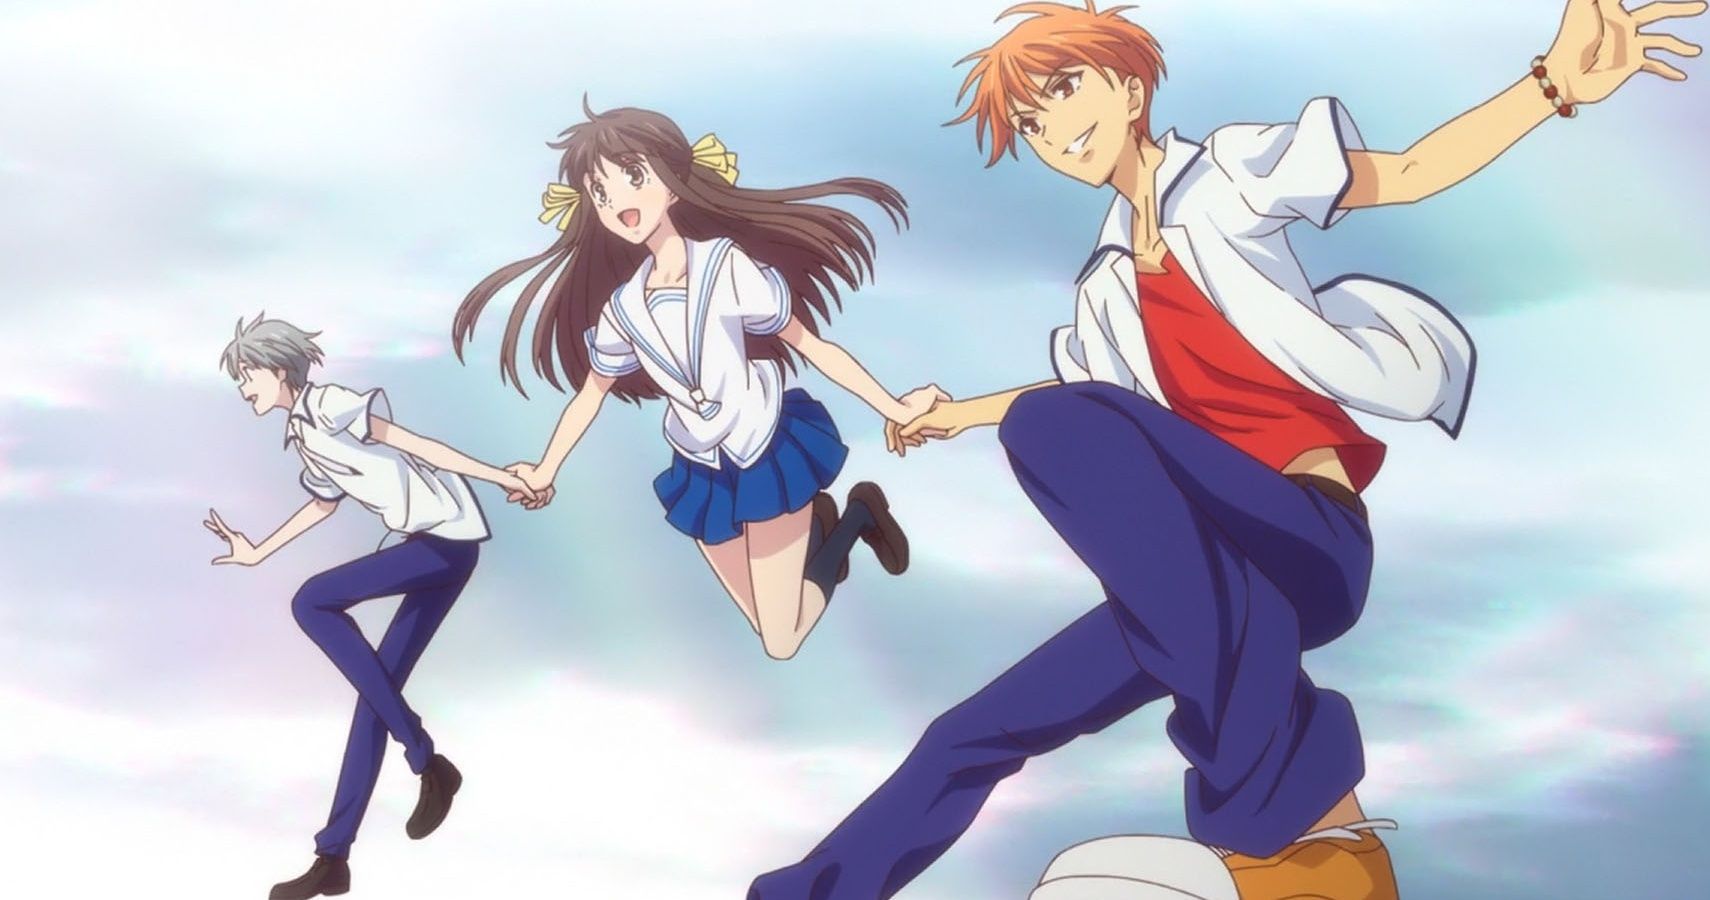 New Fruits Basket anime to air in 2019 - Polygon